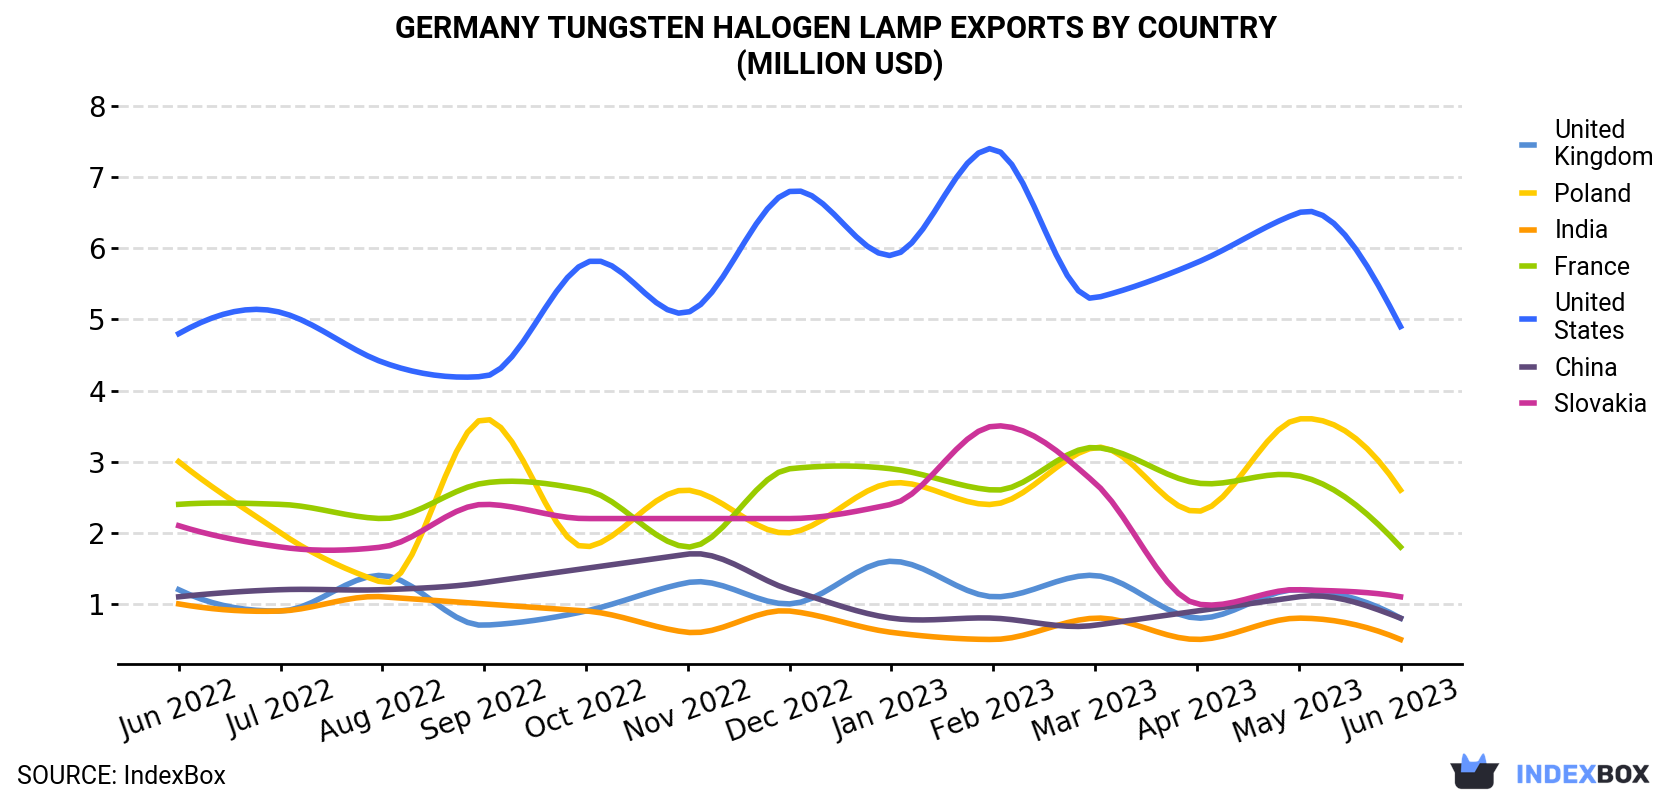 Germany Tungsten Halogen Lamp Exports By Country (Million USD)